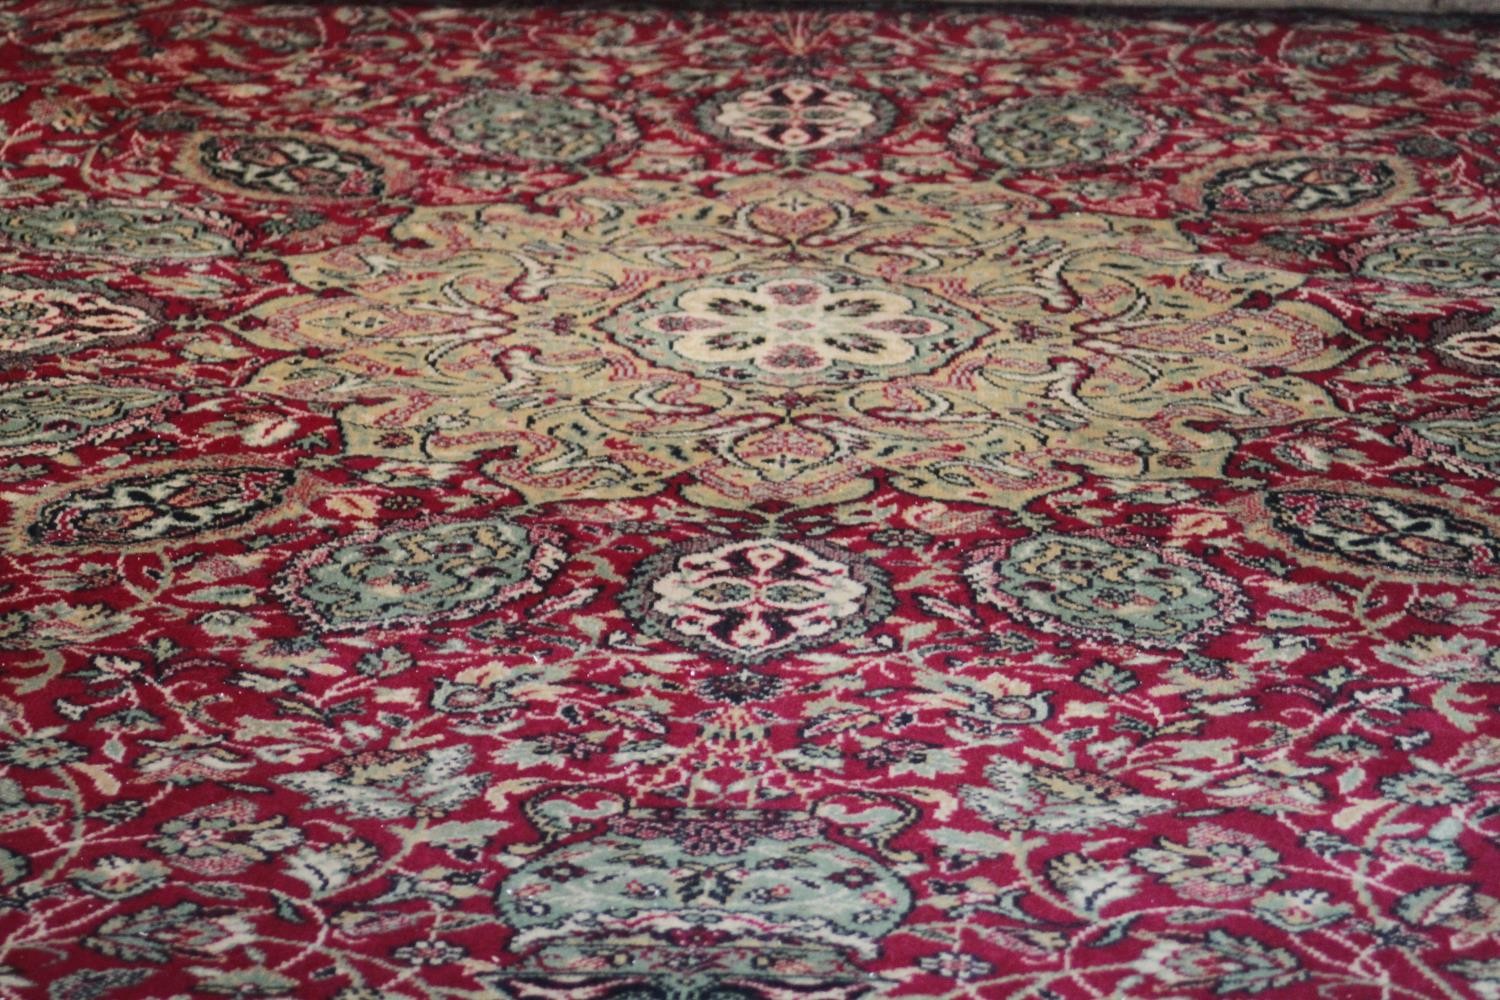 A large Wilton carpet with repeating floral medallions and trailing foliate decoration on a burgundy